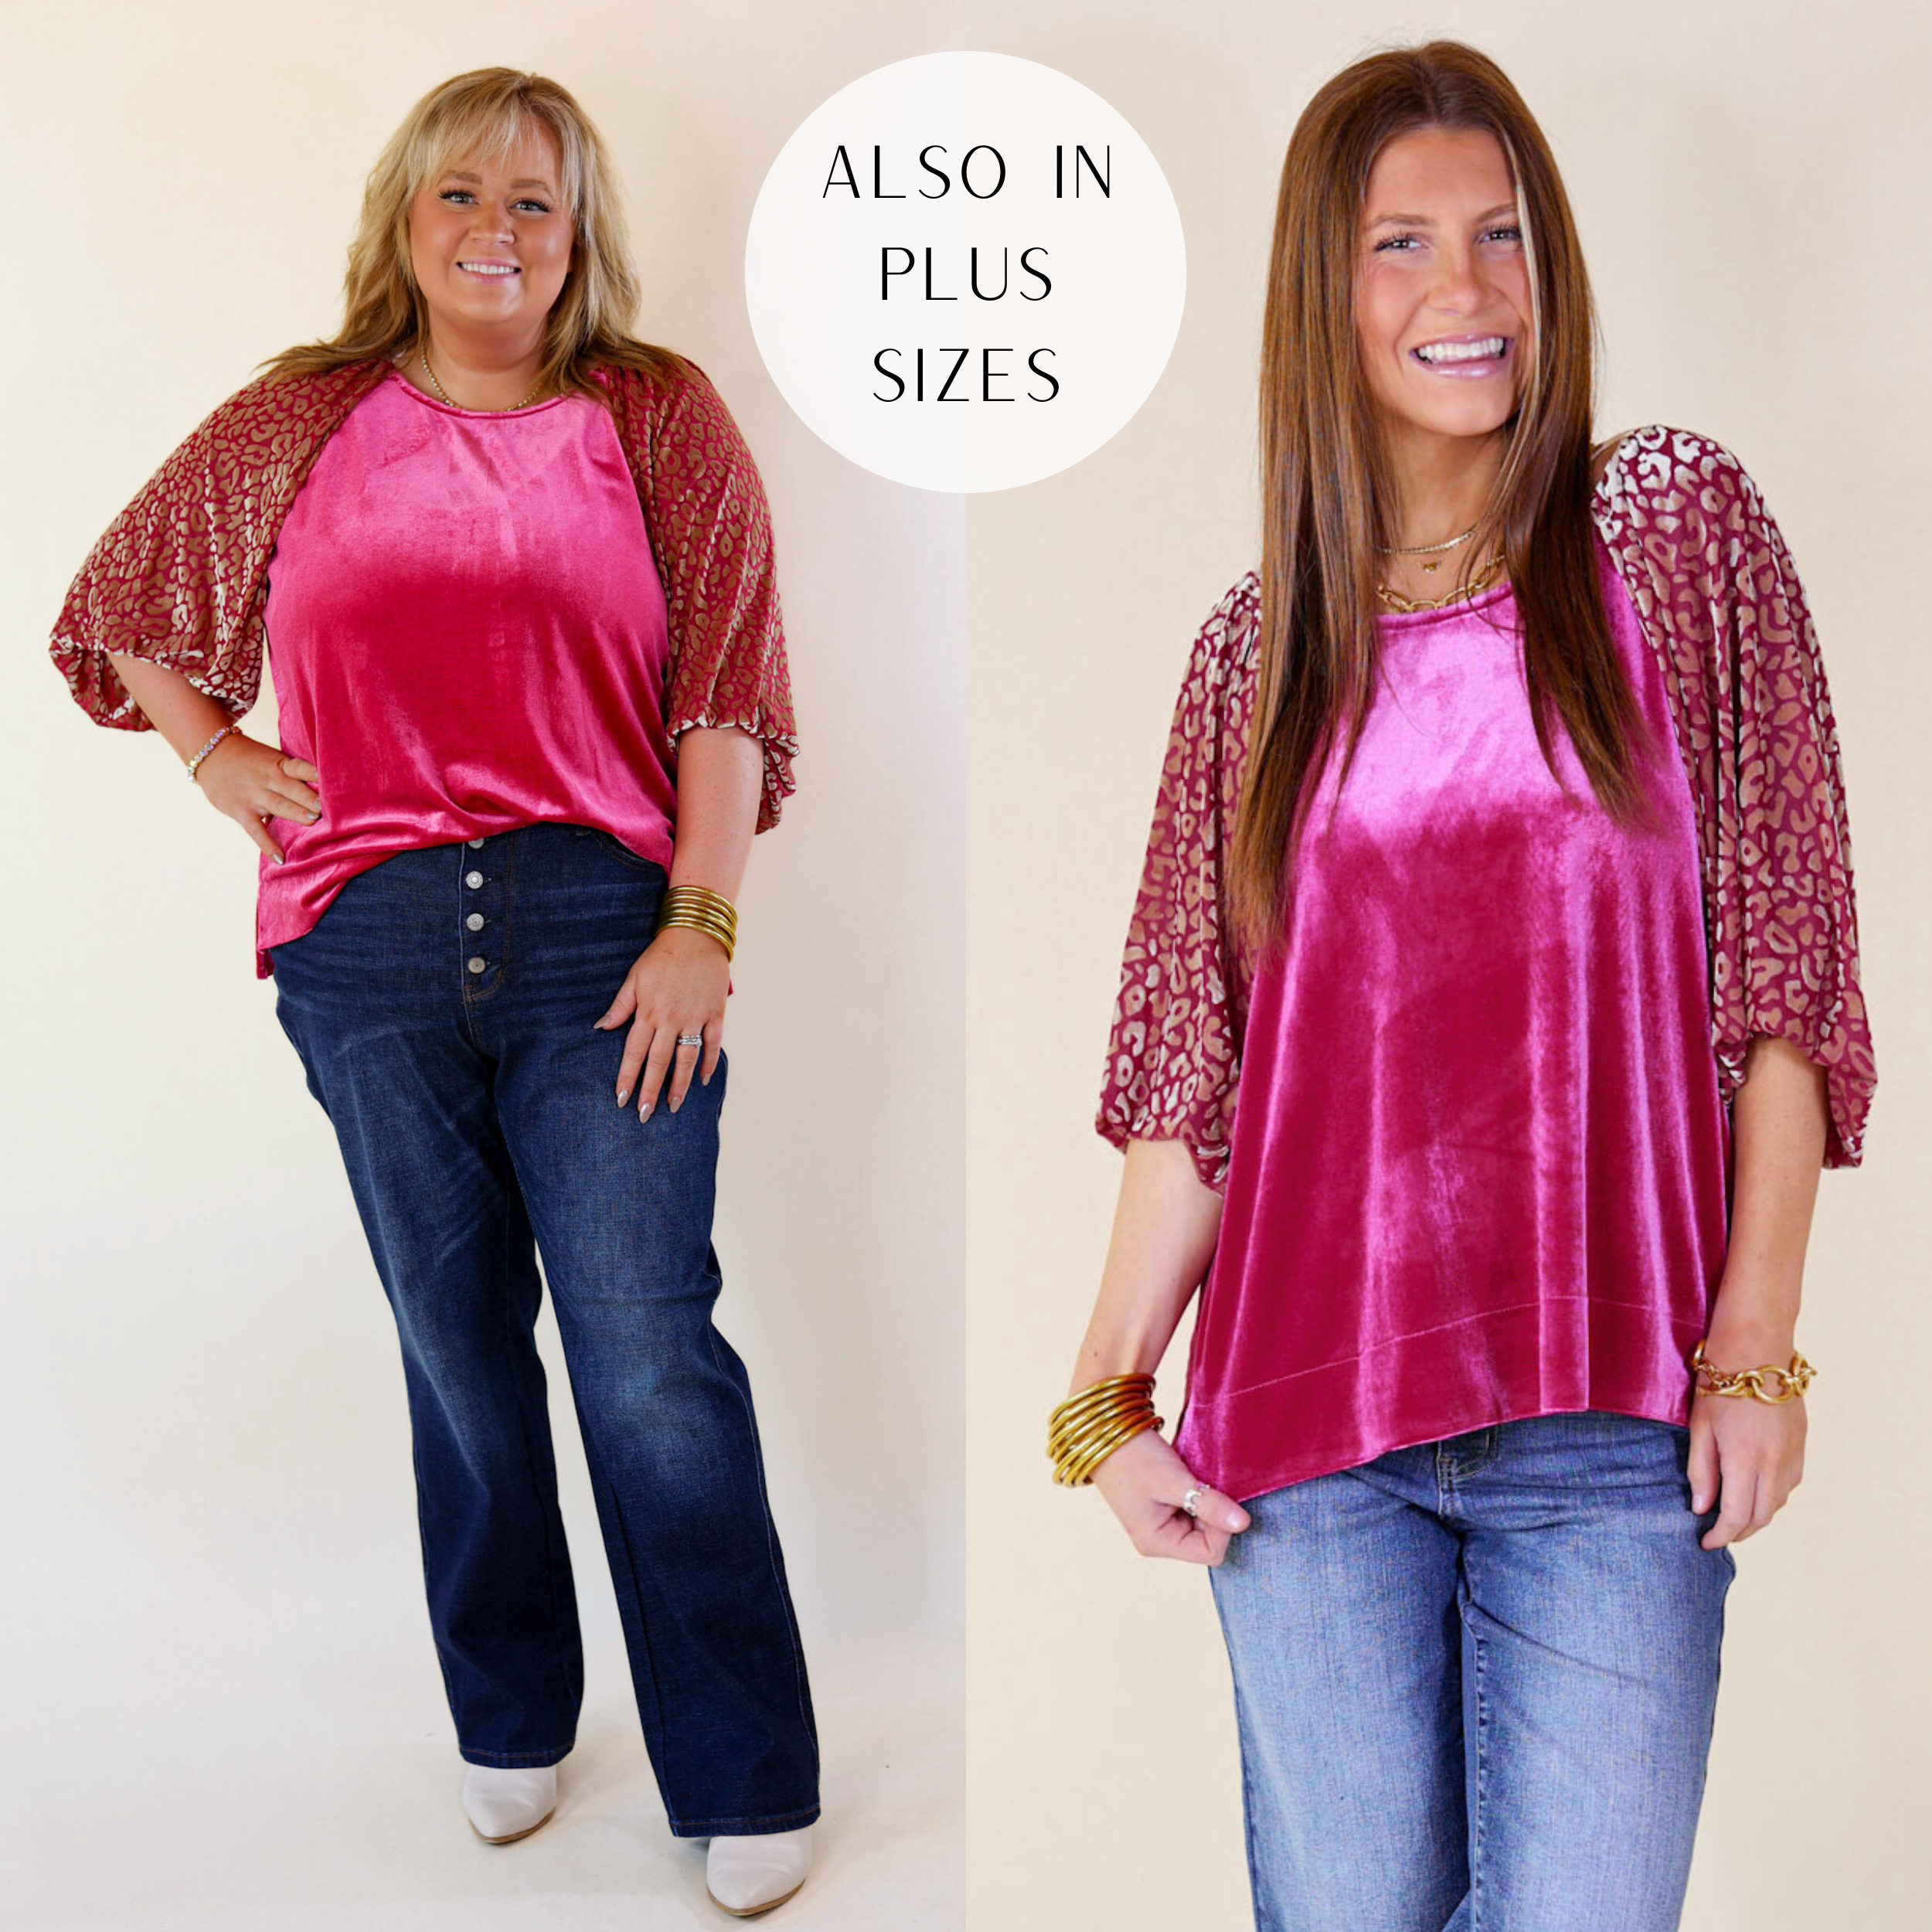 Models are wearing a animal print velvet top in raspberry red with 3/4 sleeves.  Size plus model has it paired with dark washed Judy Blue jeans, white boots, and gold jewelry. Size small model is has it paired with medium washed jeans and gold jewelry. 